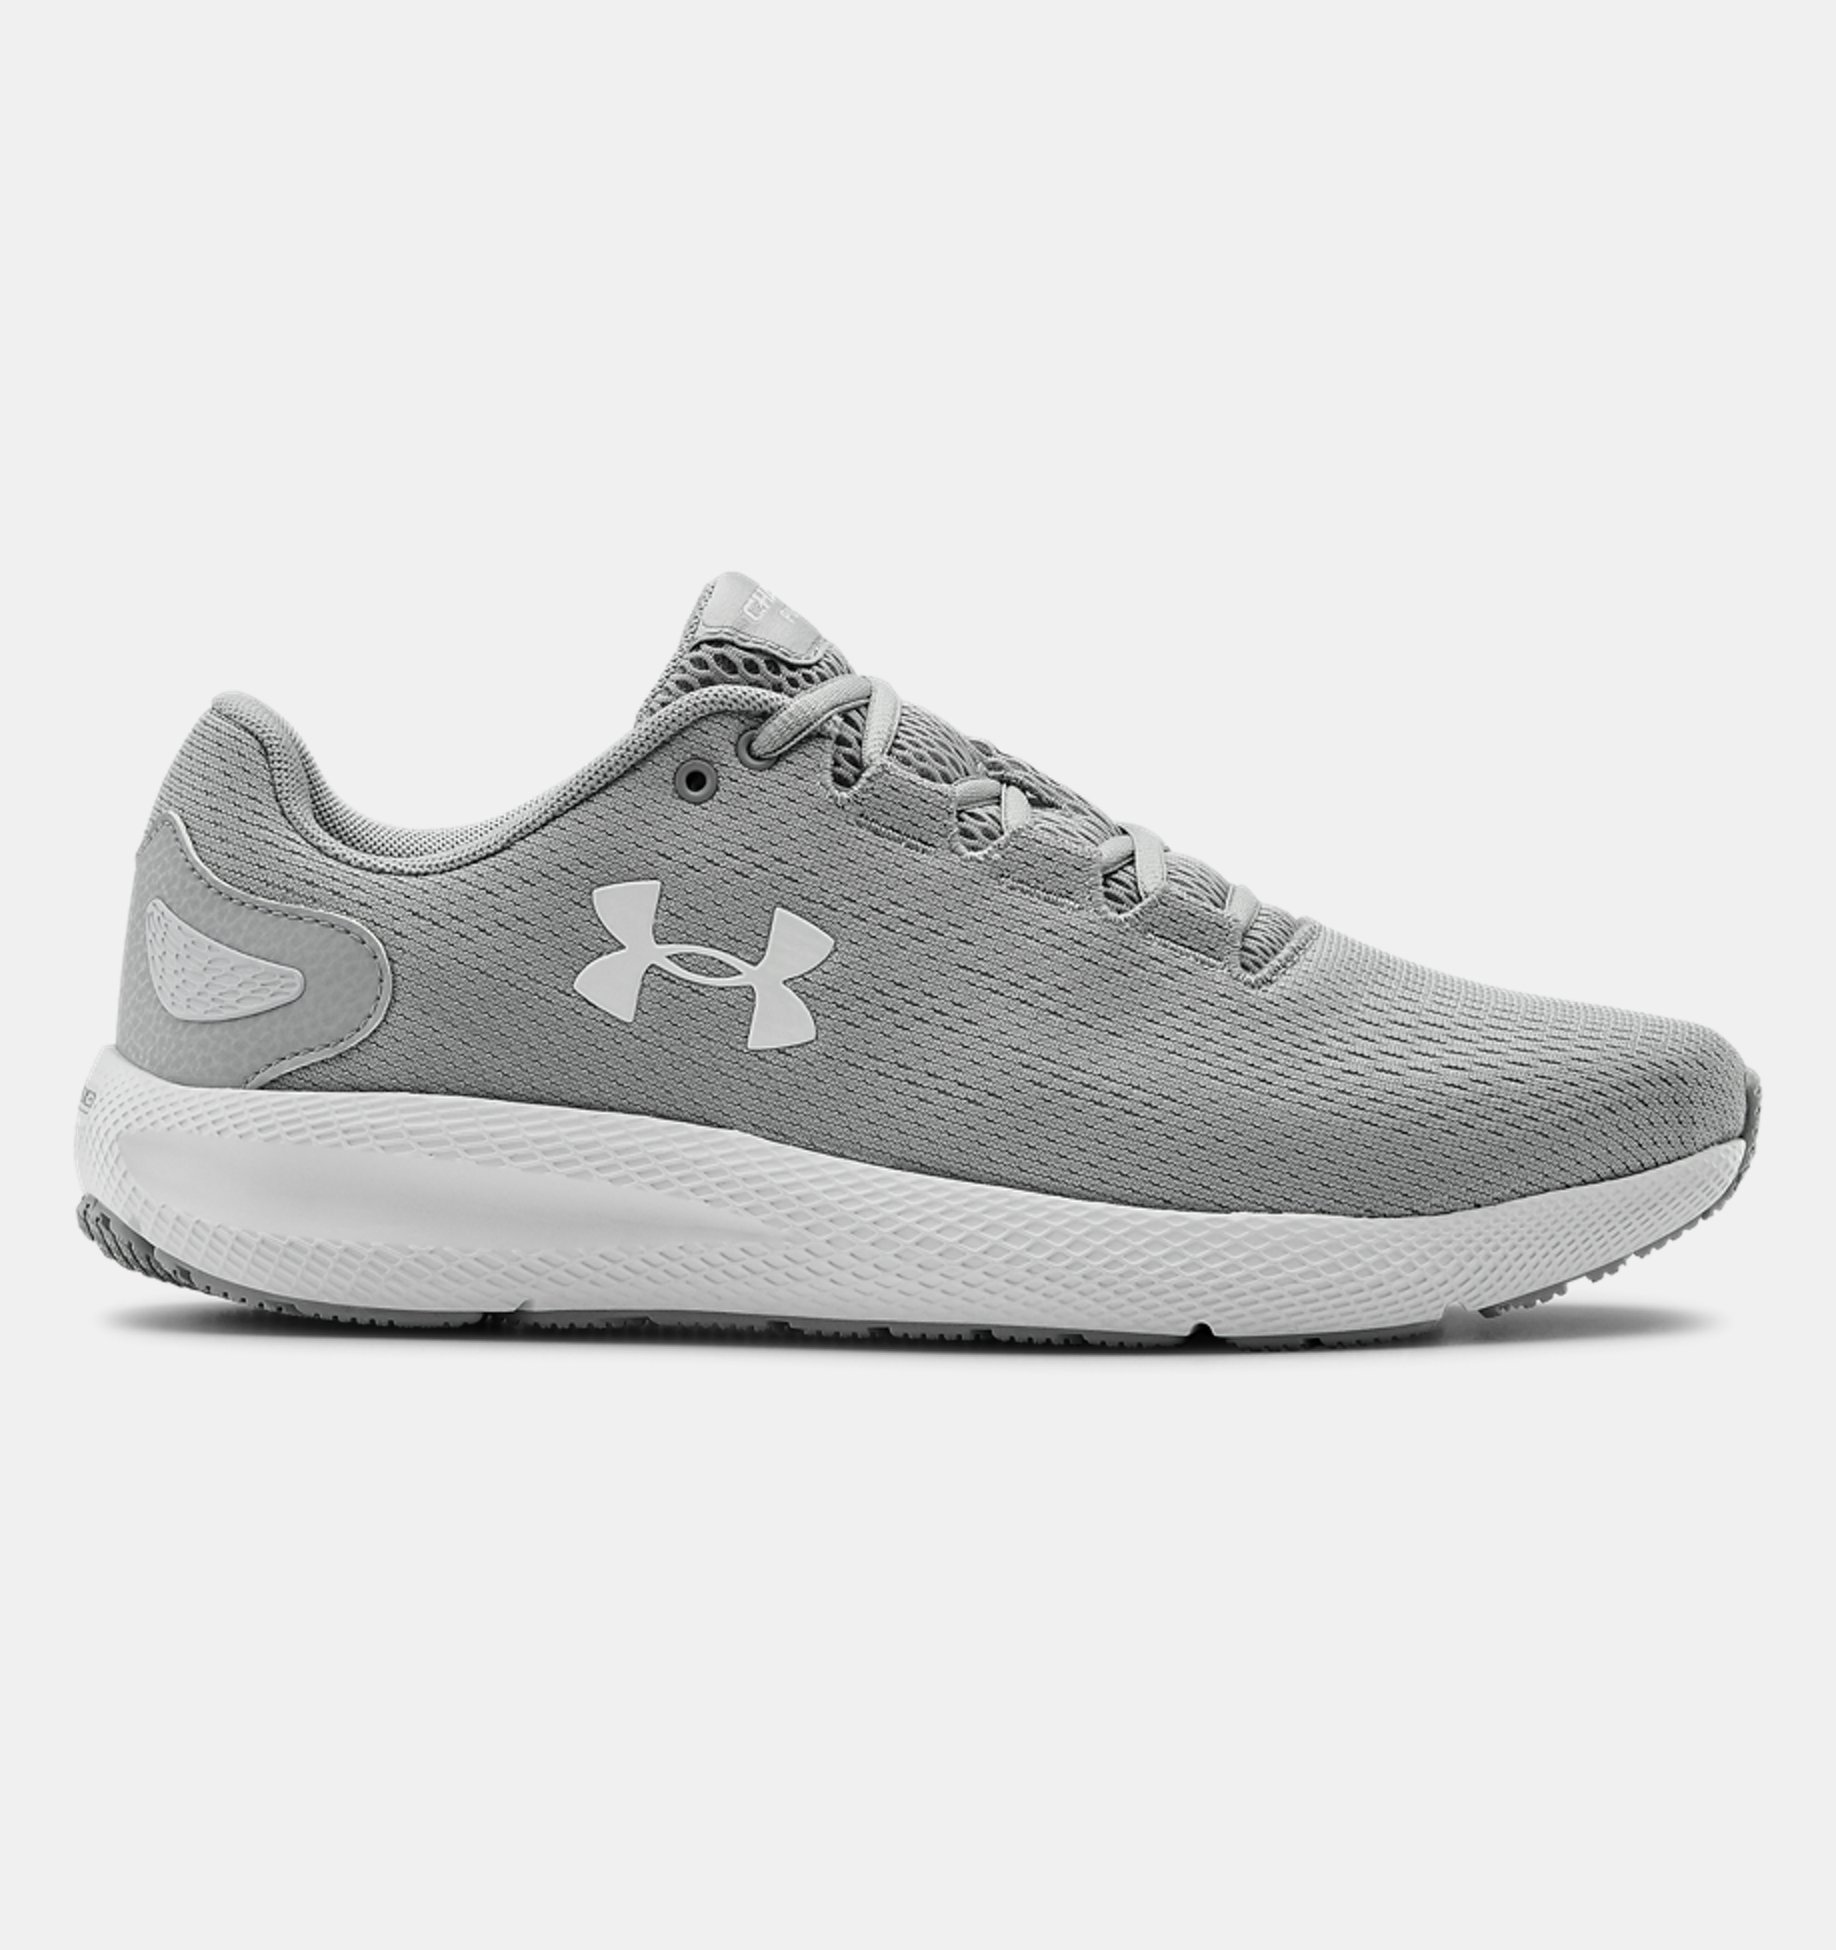 Underarmour Mens UA Charged Pursuit 2 Running Shoes